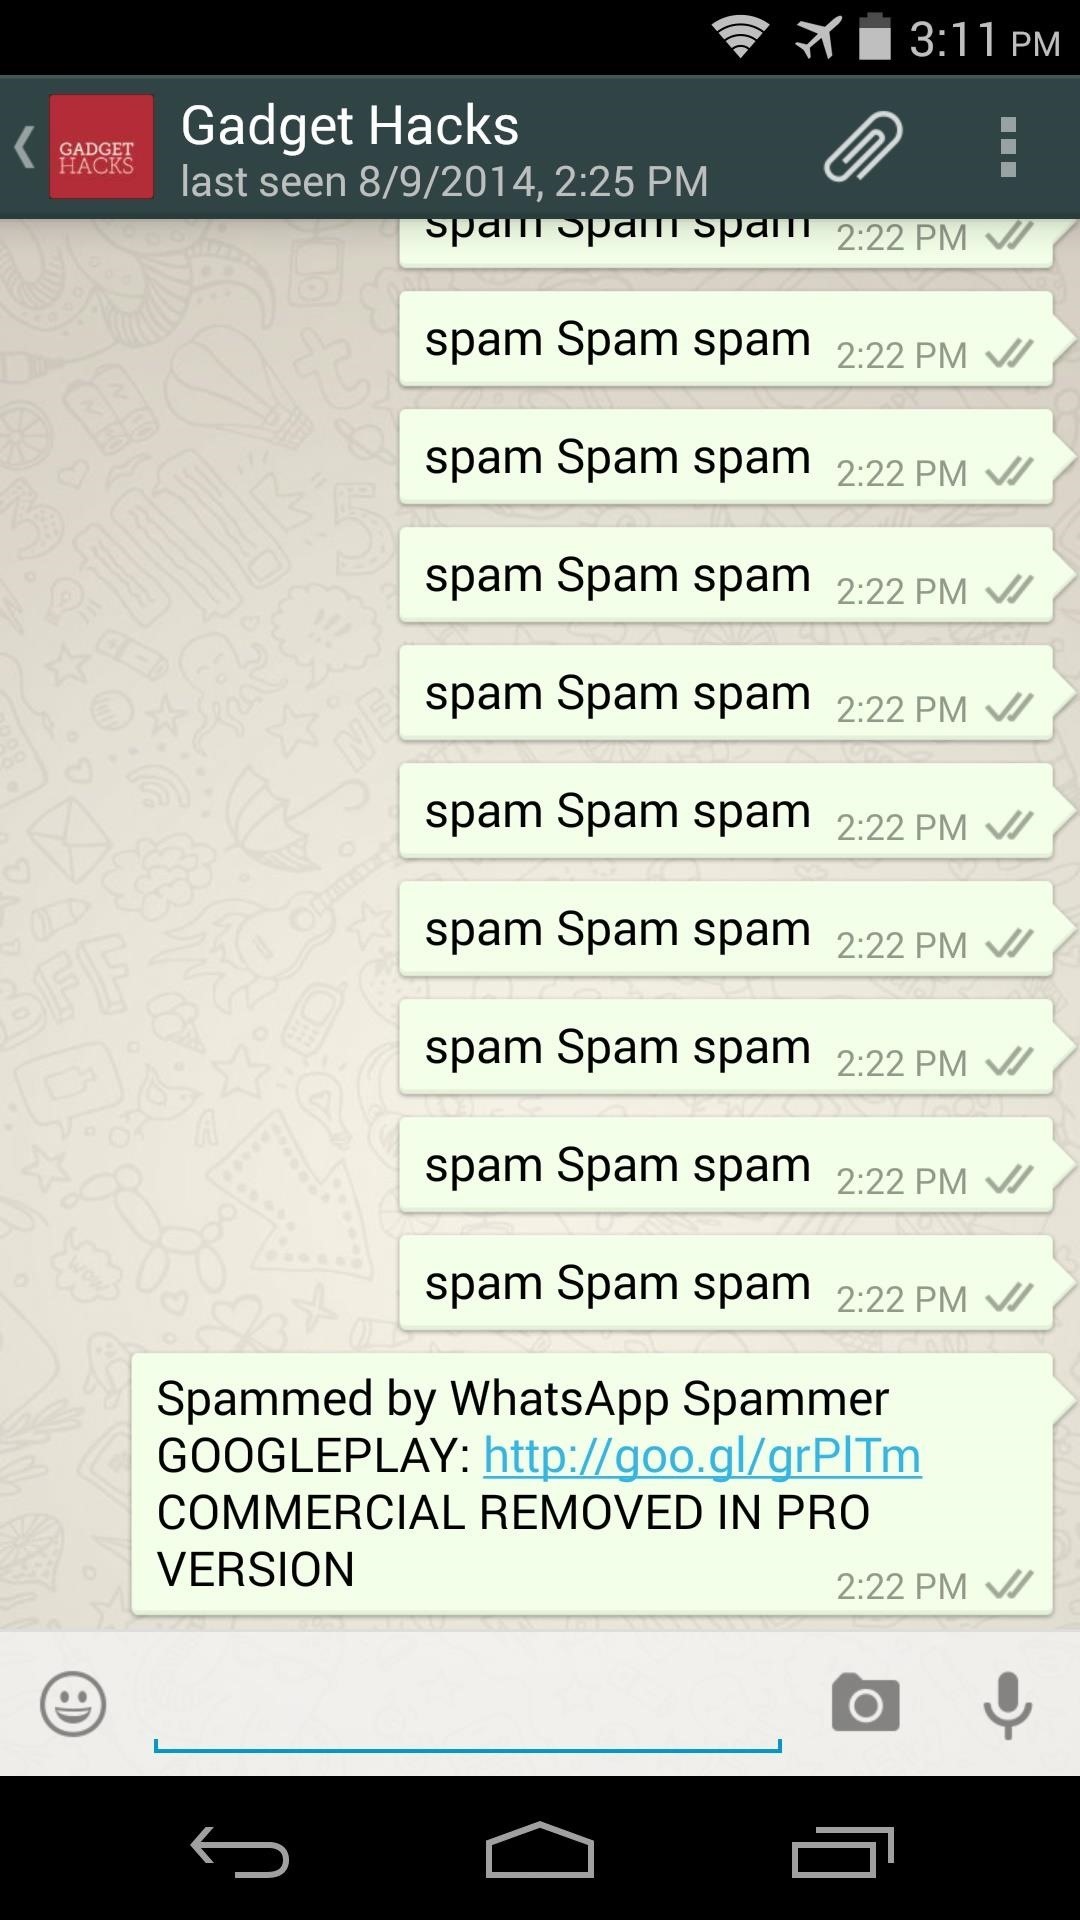 How to Prank Your WhatsApp Friends by Sending 100 Messages in Only 1 Second